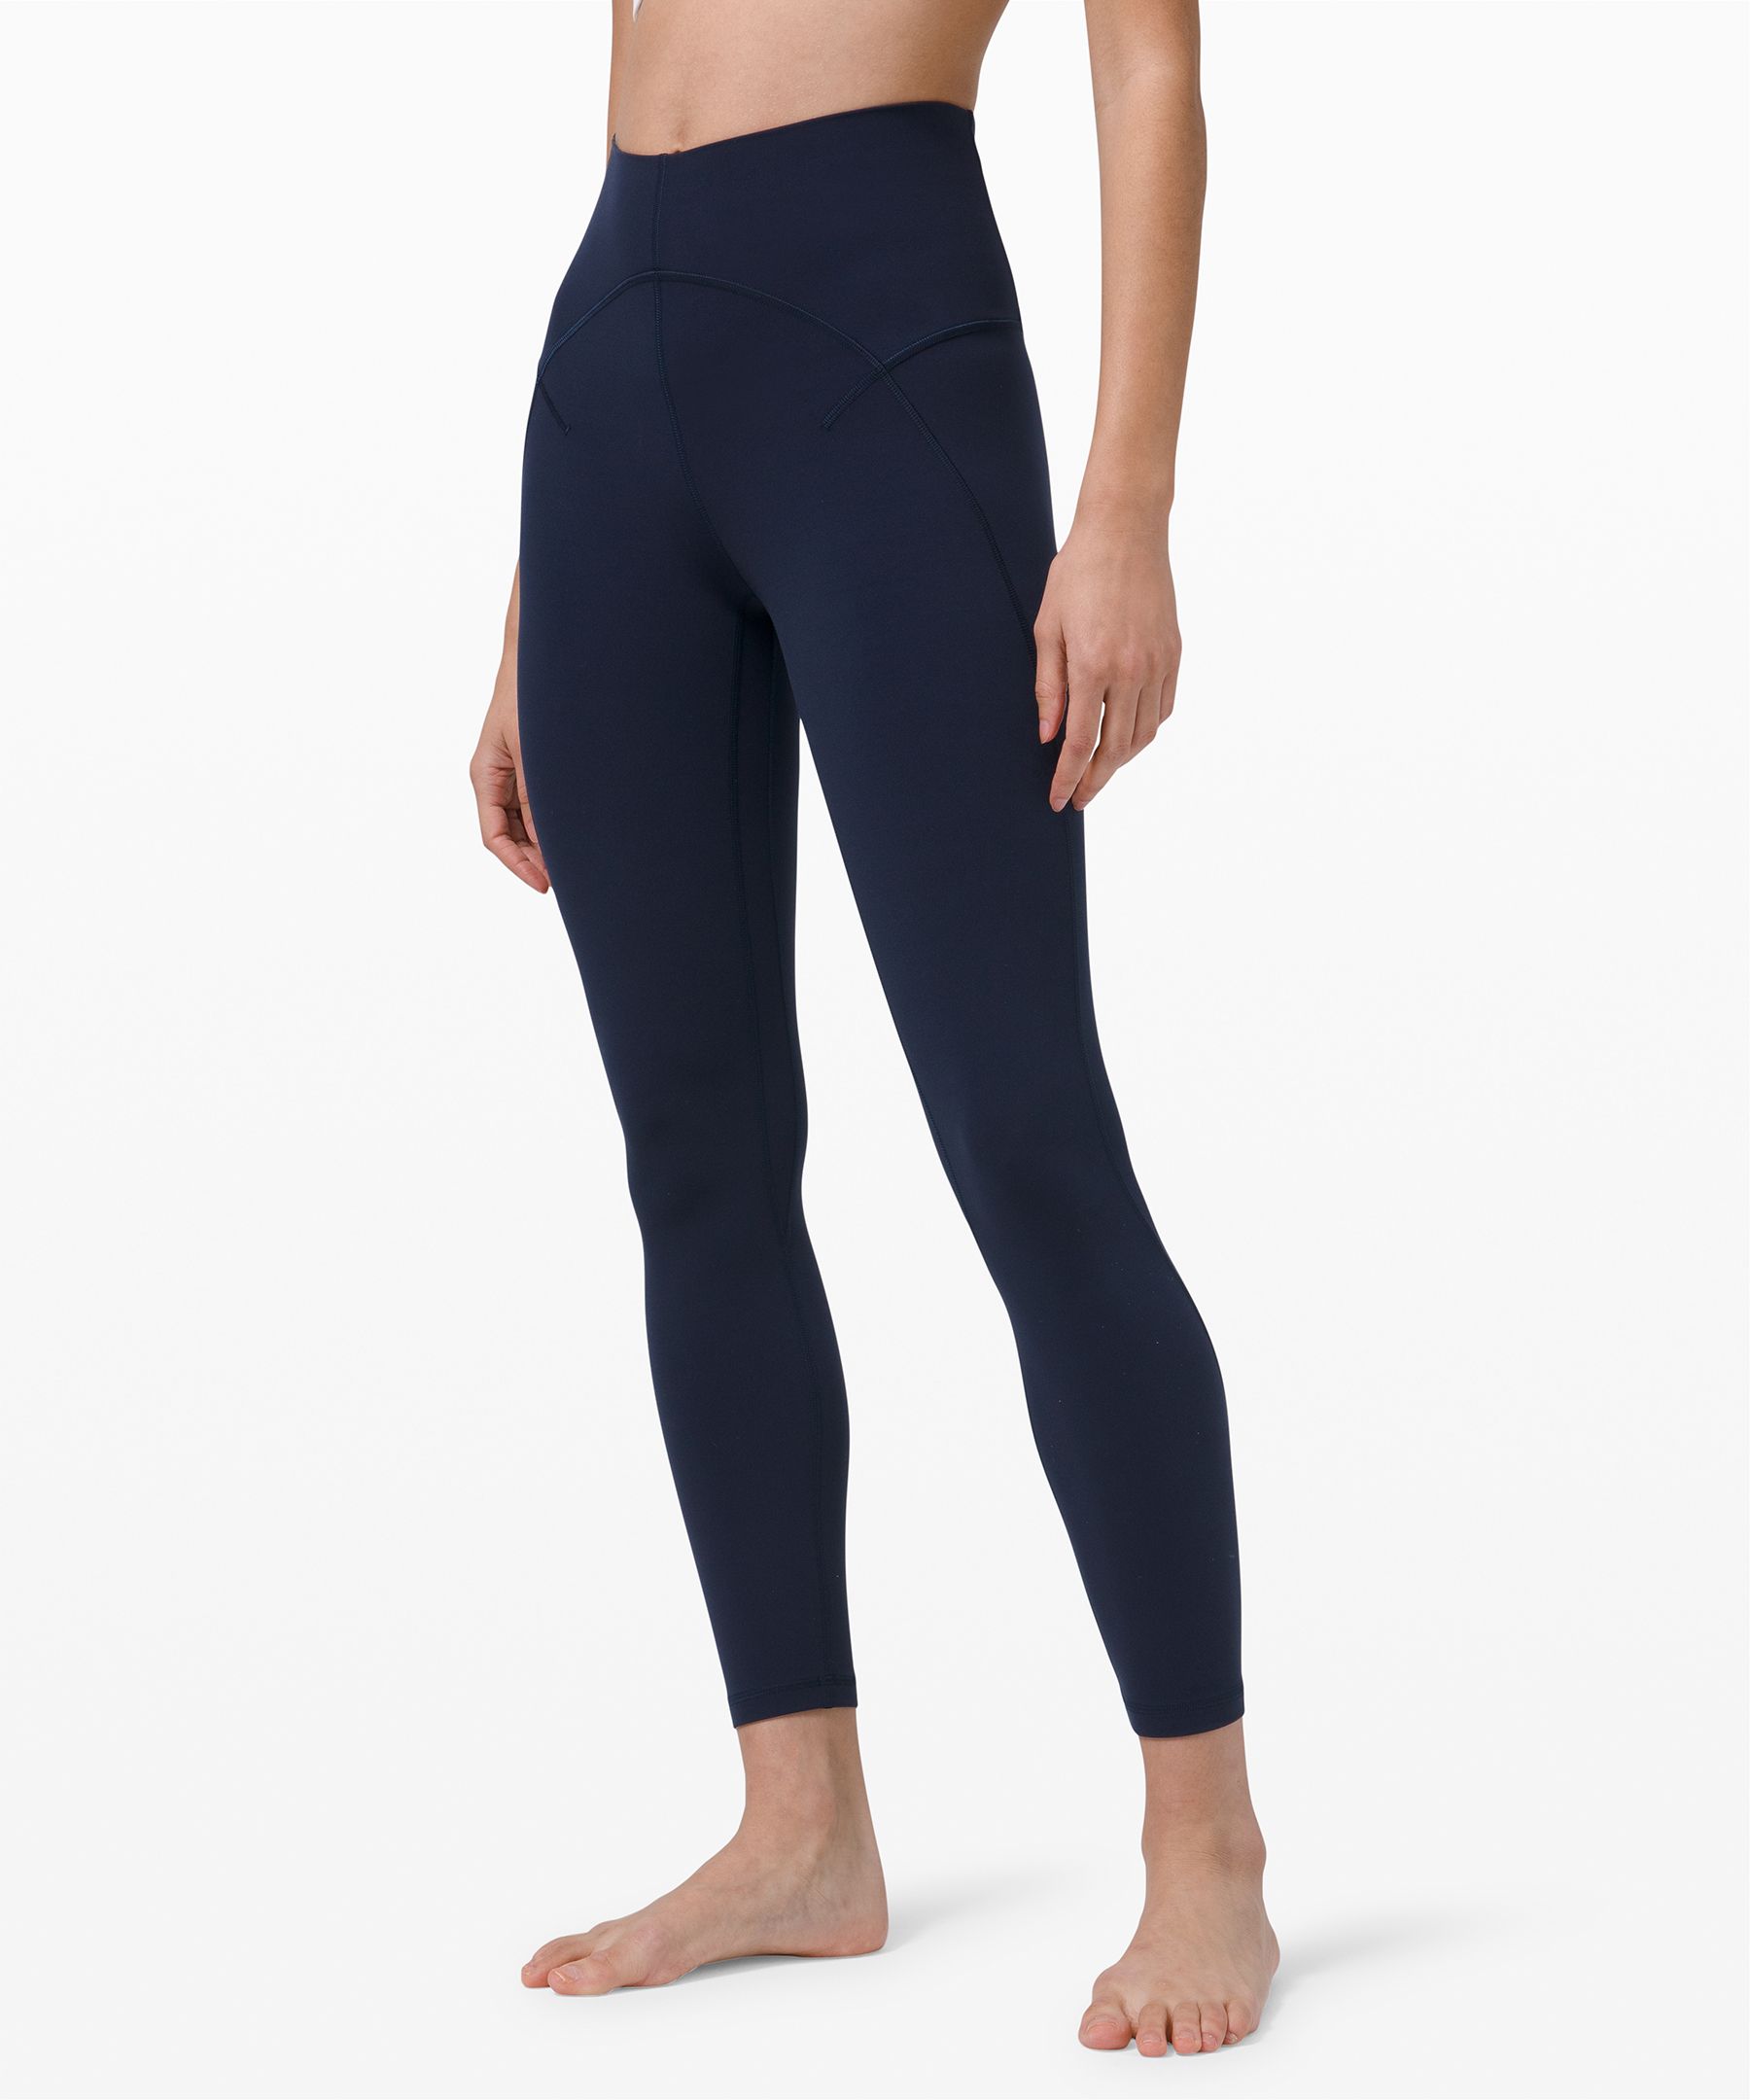 Lululemon Unlimit High-rise Tights 25 In True Navy